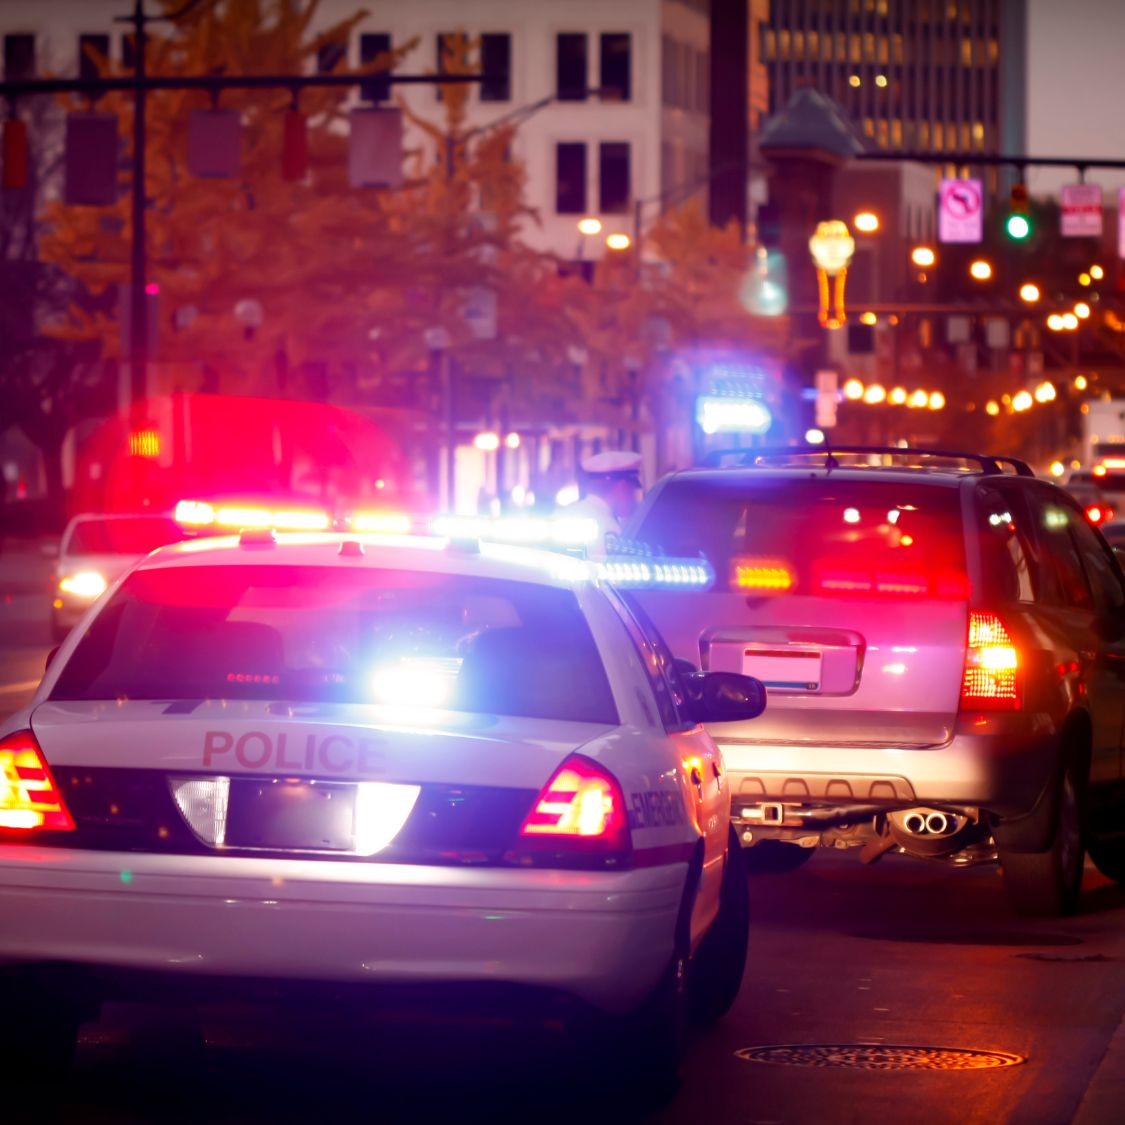 Steps To Take After Getting a DUI Charge